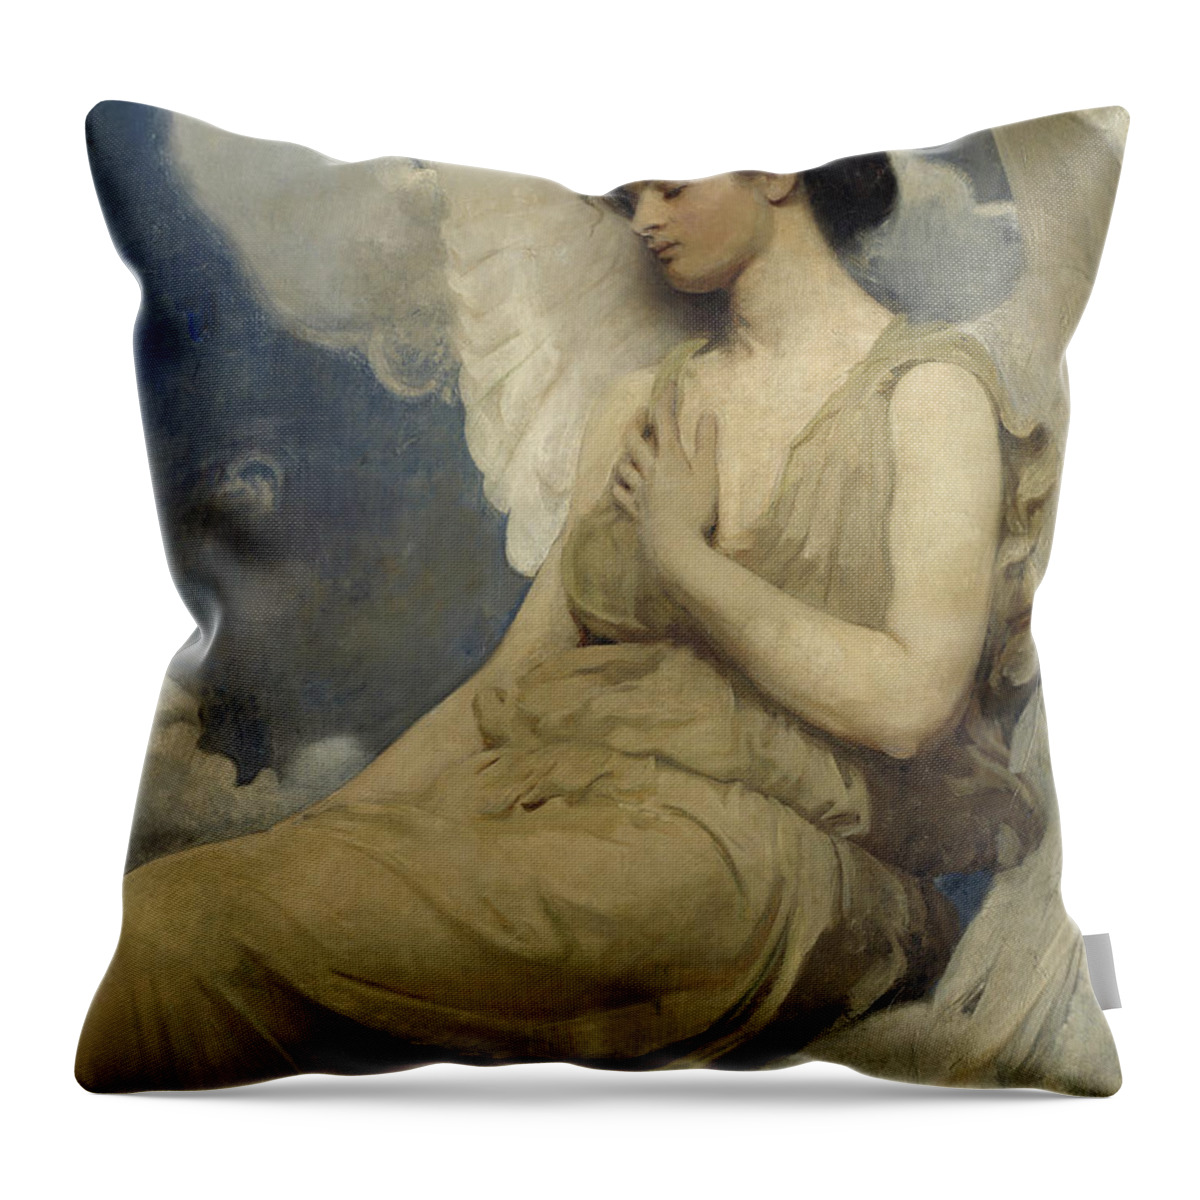 Angel Throw Pillow featuring the painting Winged Figure by Abbott Handerson Thayer